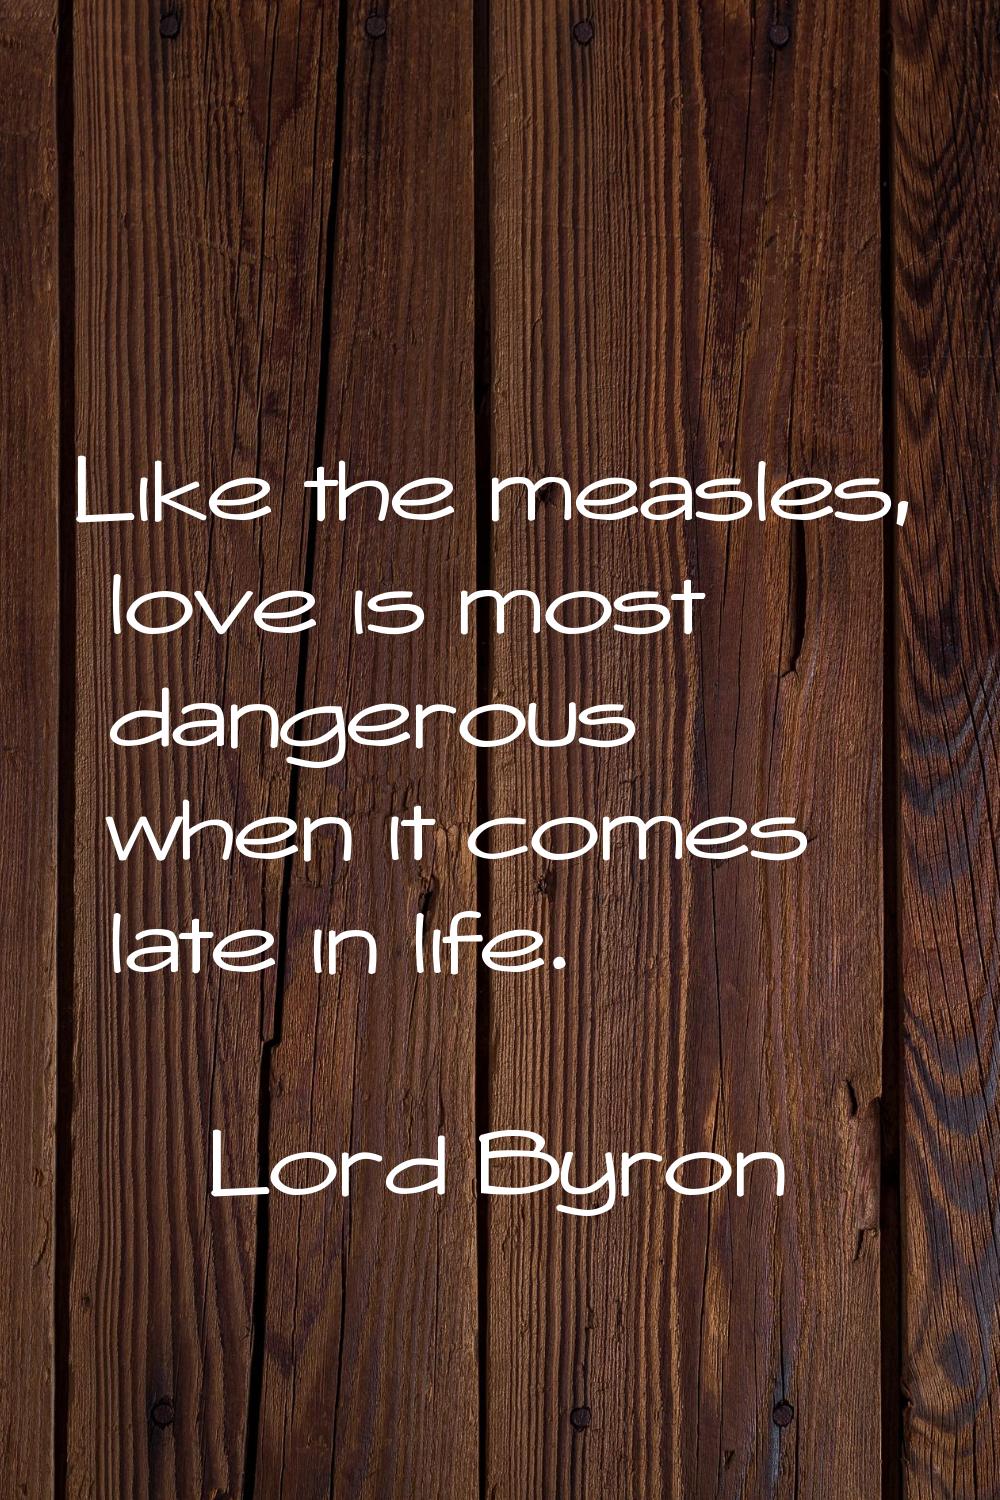 Like the measles, love is most dangerous when it comes late in life.